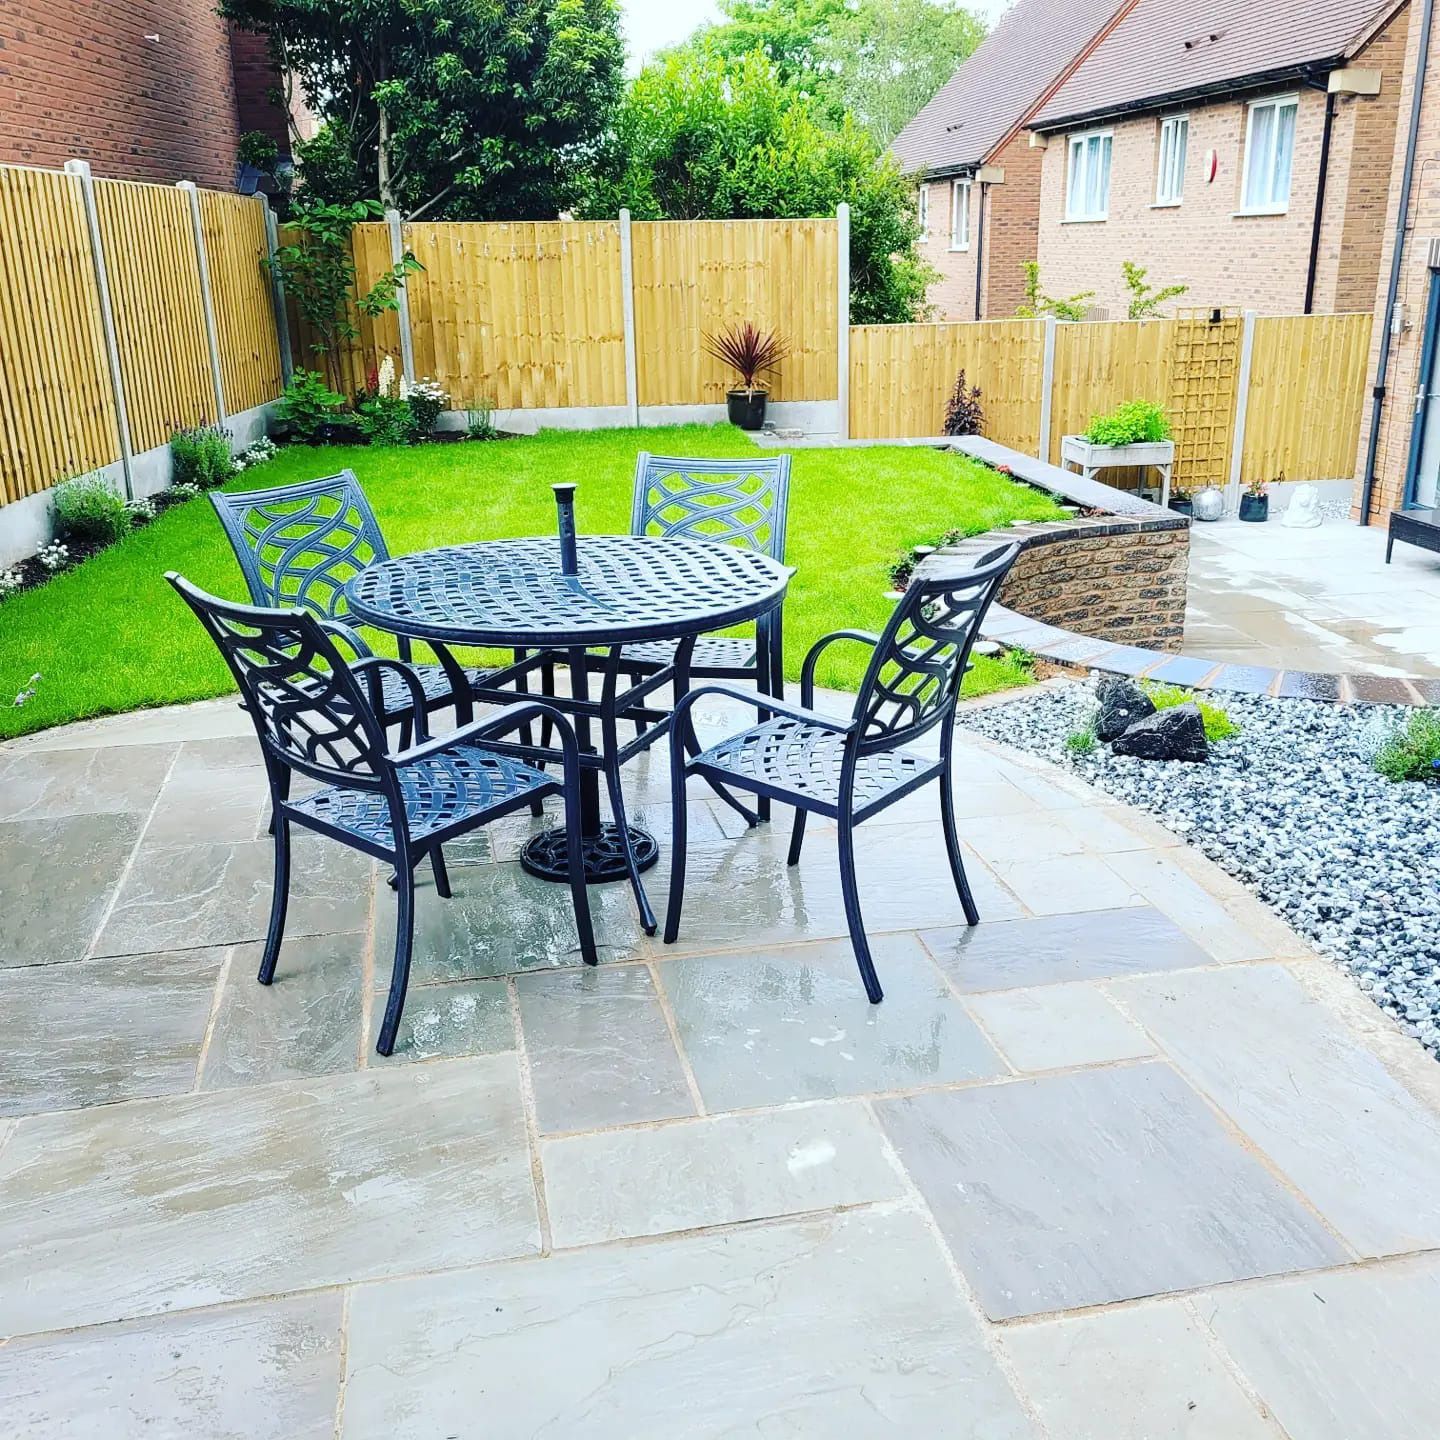 DNA Landscapes Long Lawford landscaping project